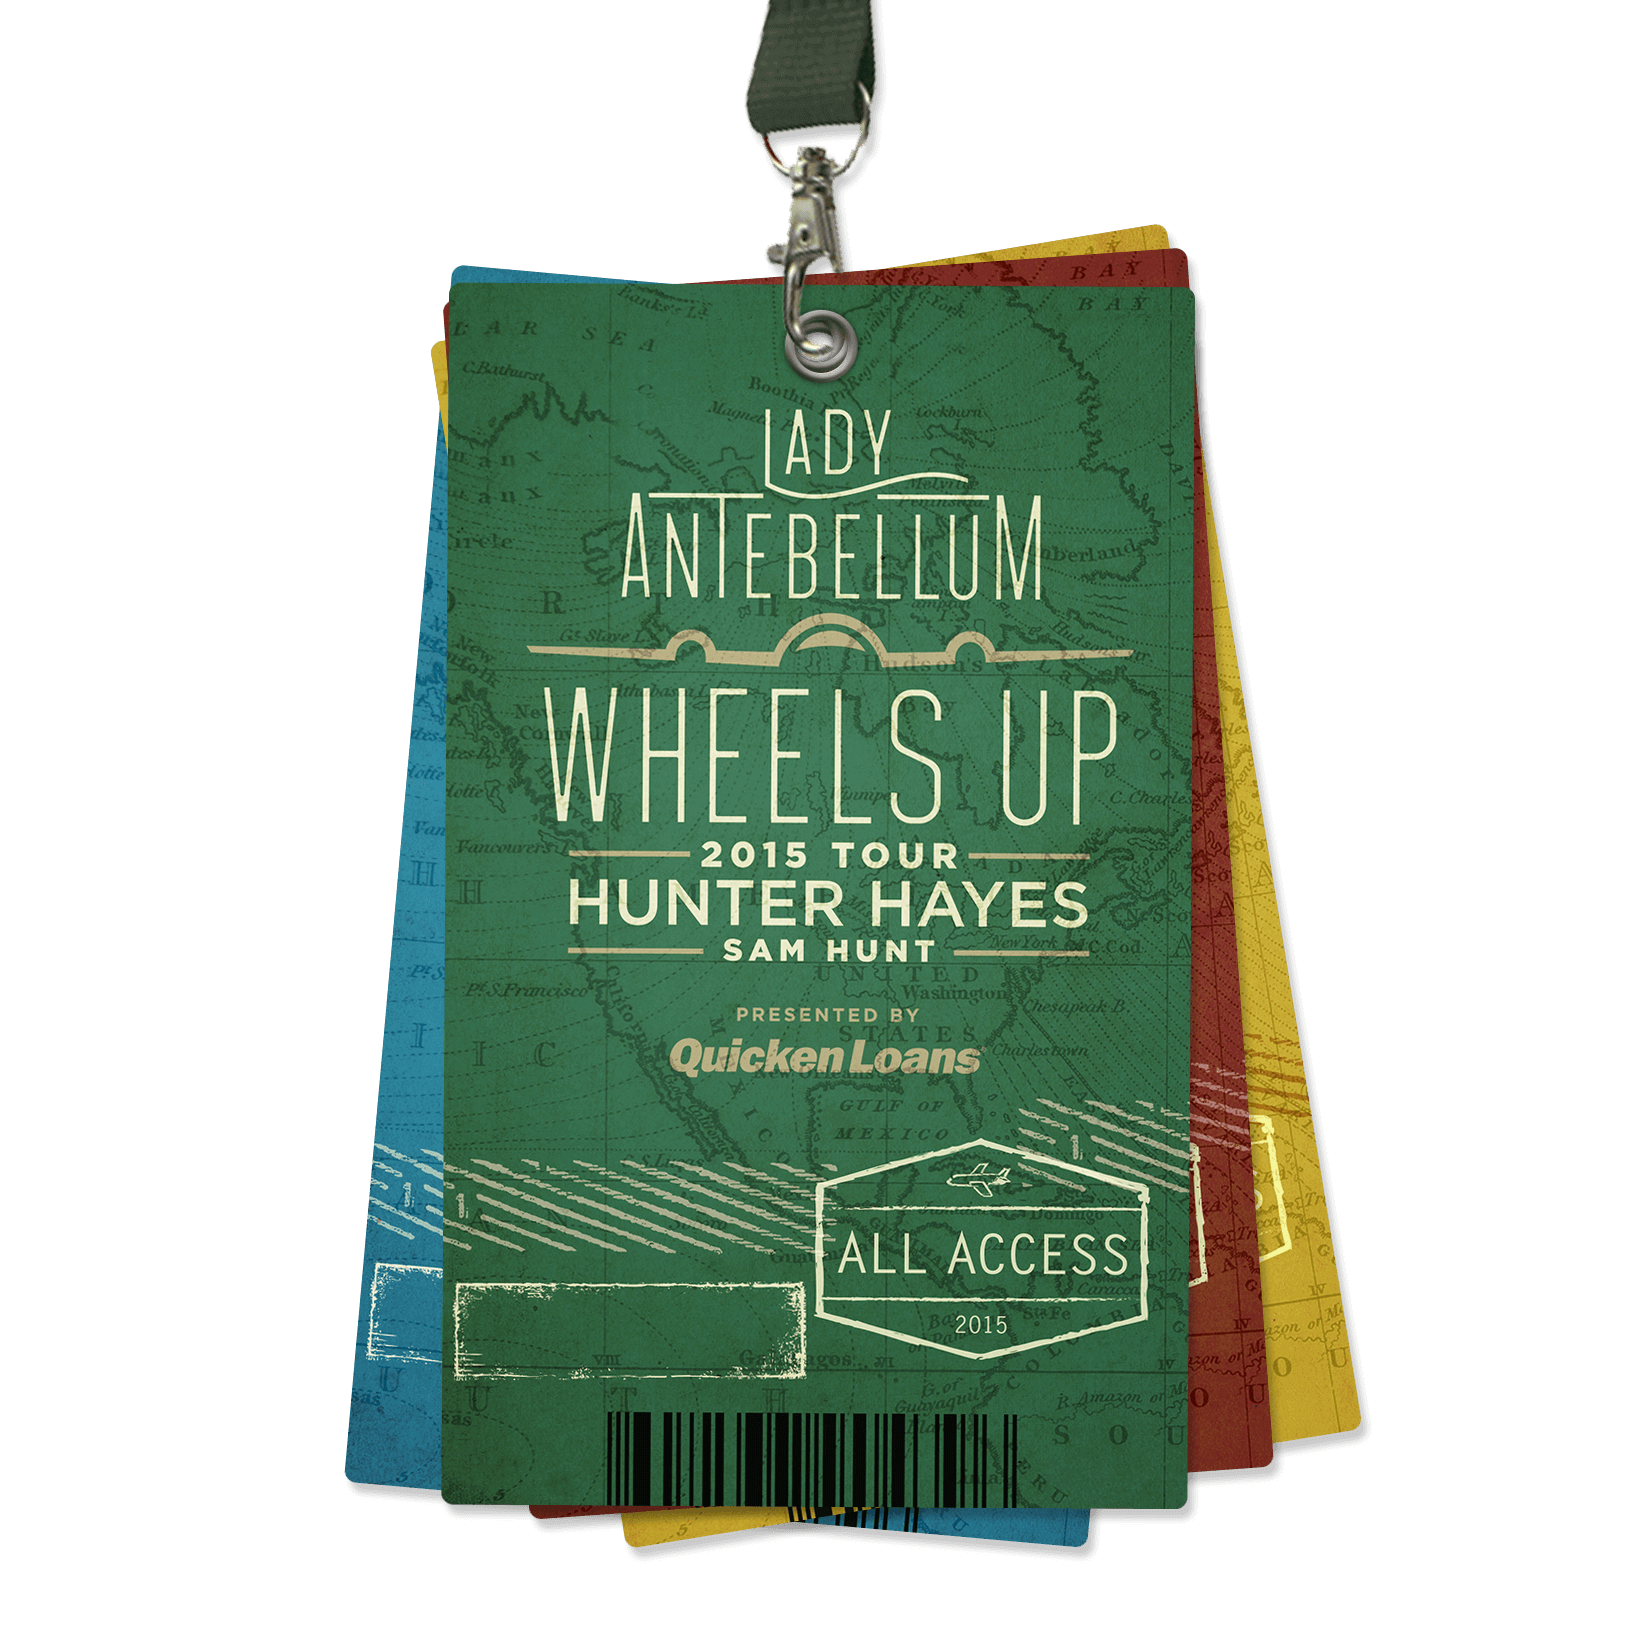 Wheels Up tour badge design featuring full tour logo and map design with branded airplane elements for Lady Antebellum tour